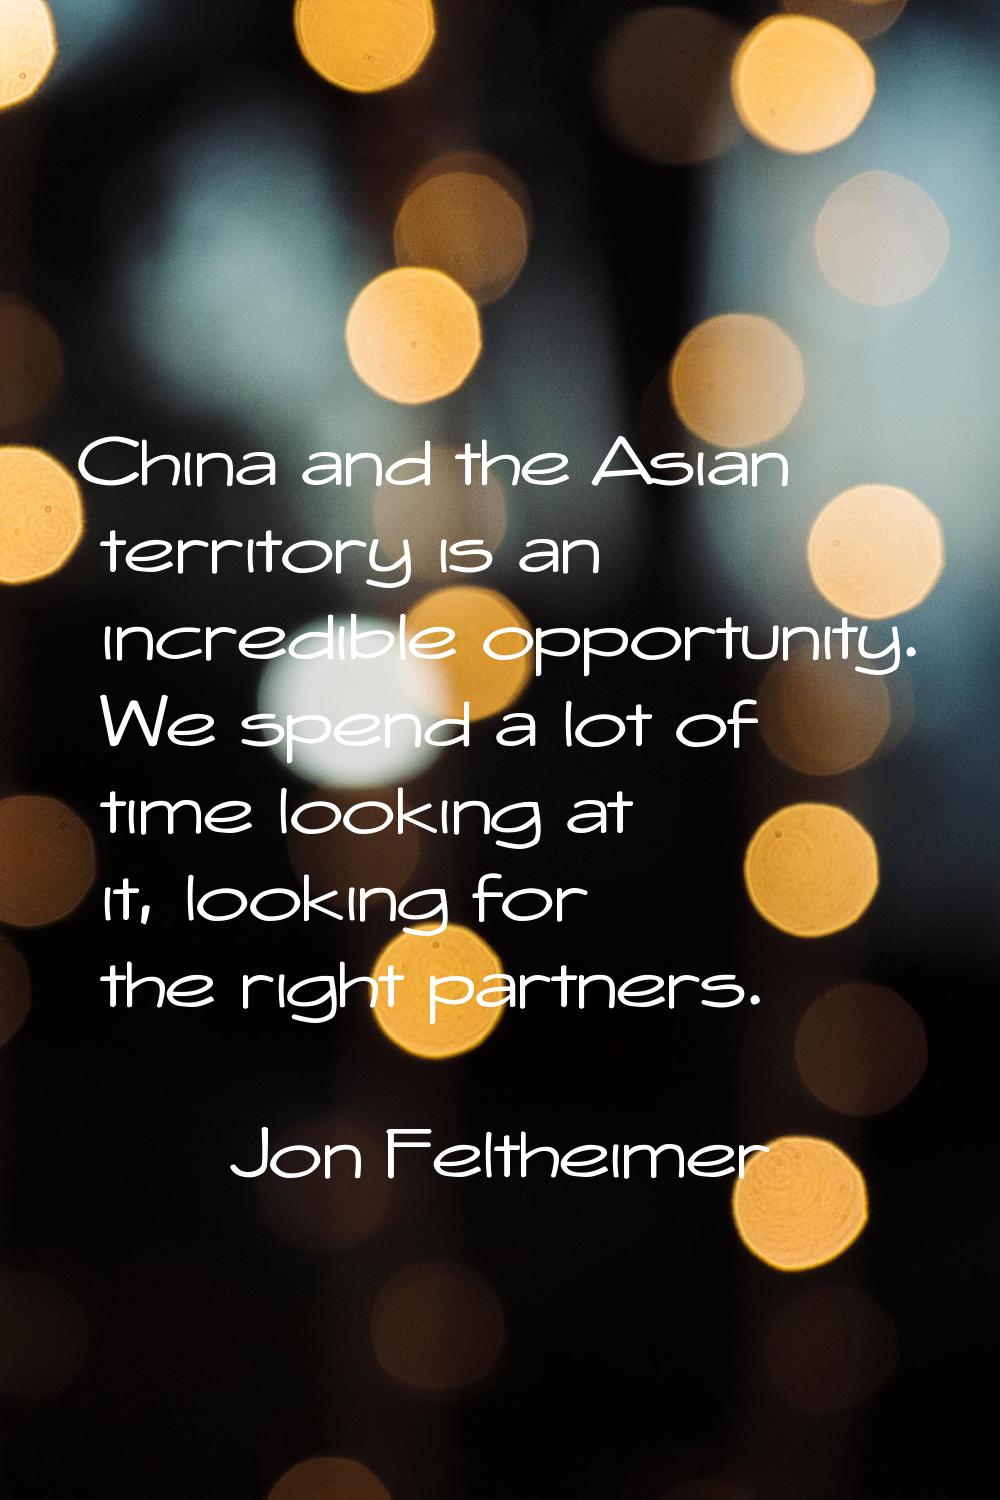 China and the Asian territory is an incredible opportunity. We spend a lot of time looking at it, l